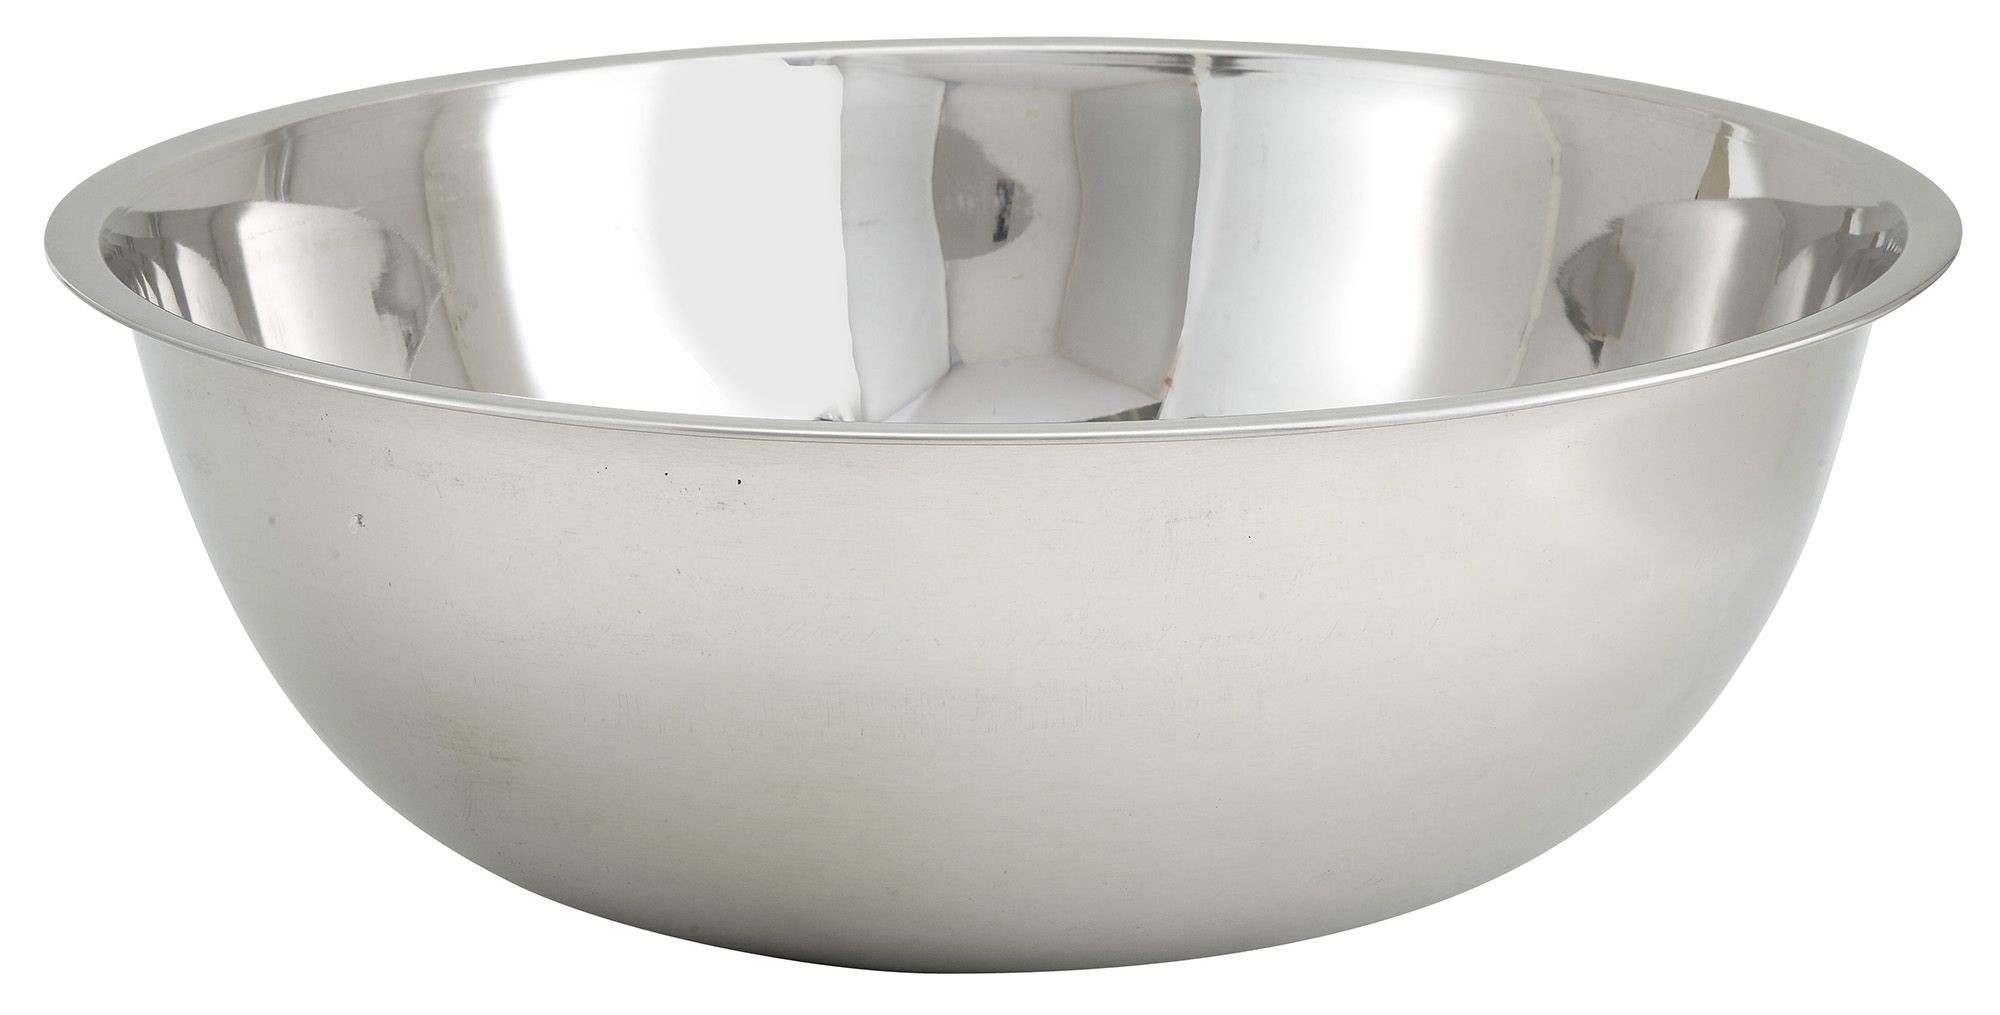 Winco MXBT-2000Q Stainless Steel All-Purpose Mixing Bowl 20 Qt. - LionsDeal 20 Qt Stainless Steel Mixing Bowl